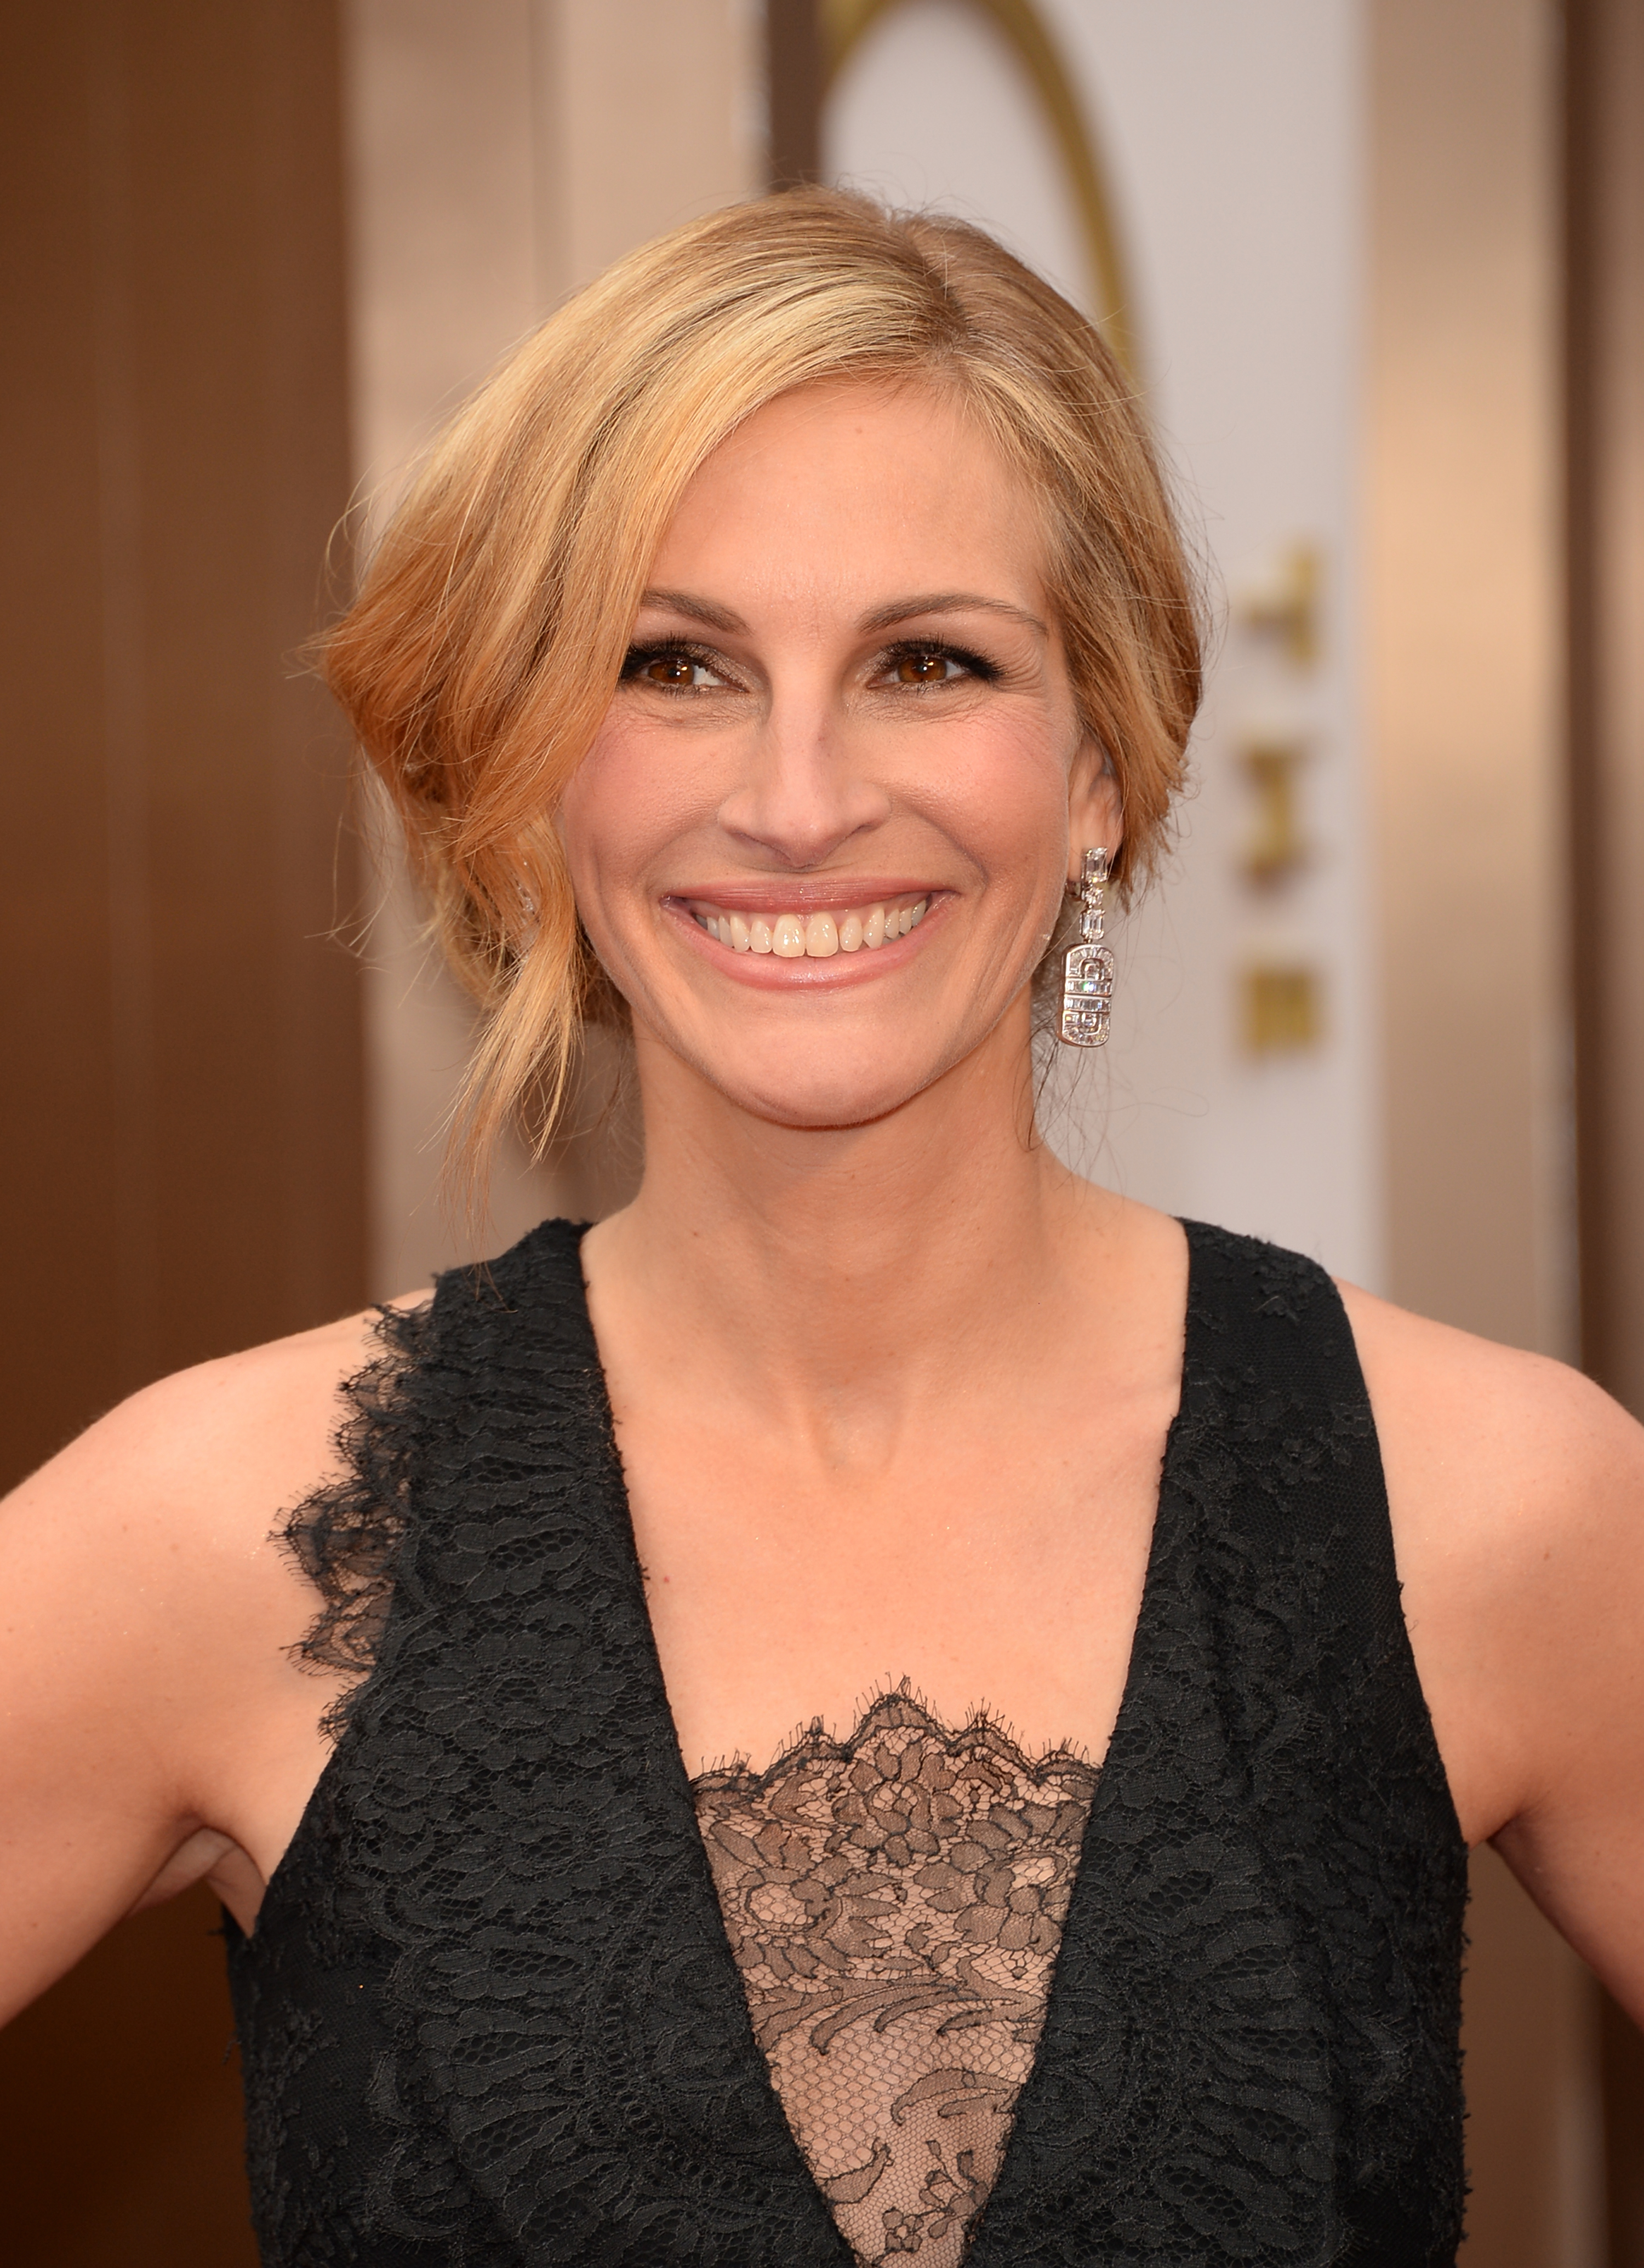 Julia Roberts in Hollywood, California on March 2, 2014 | Source: Getty Images